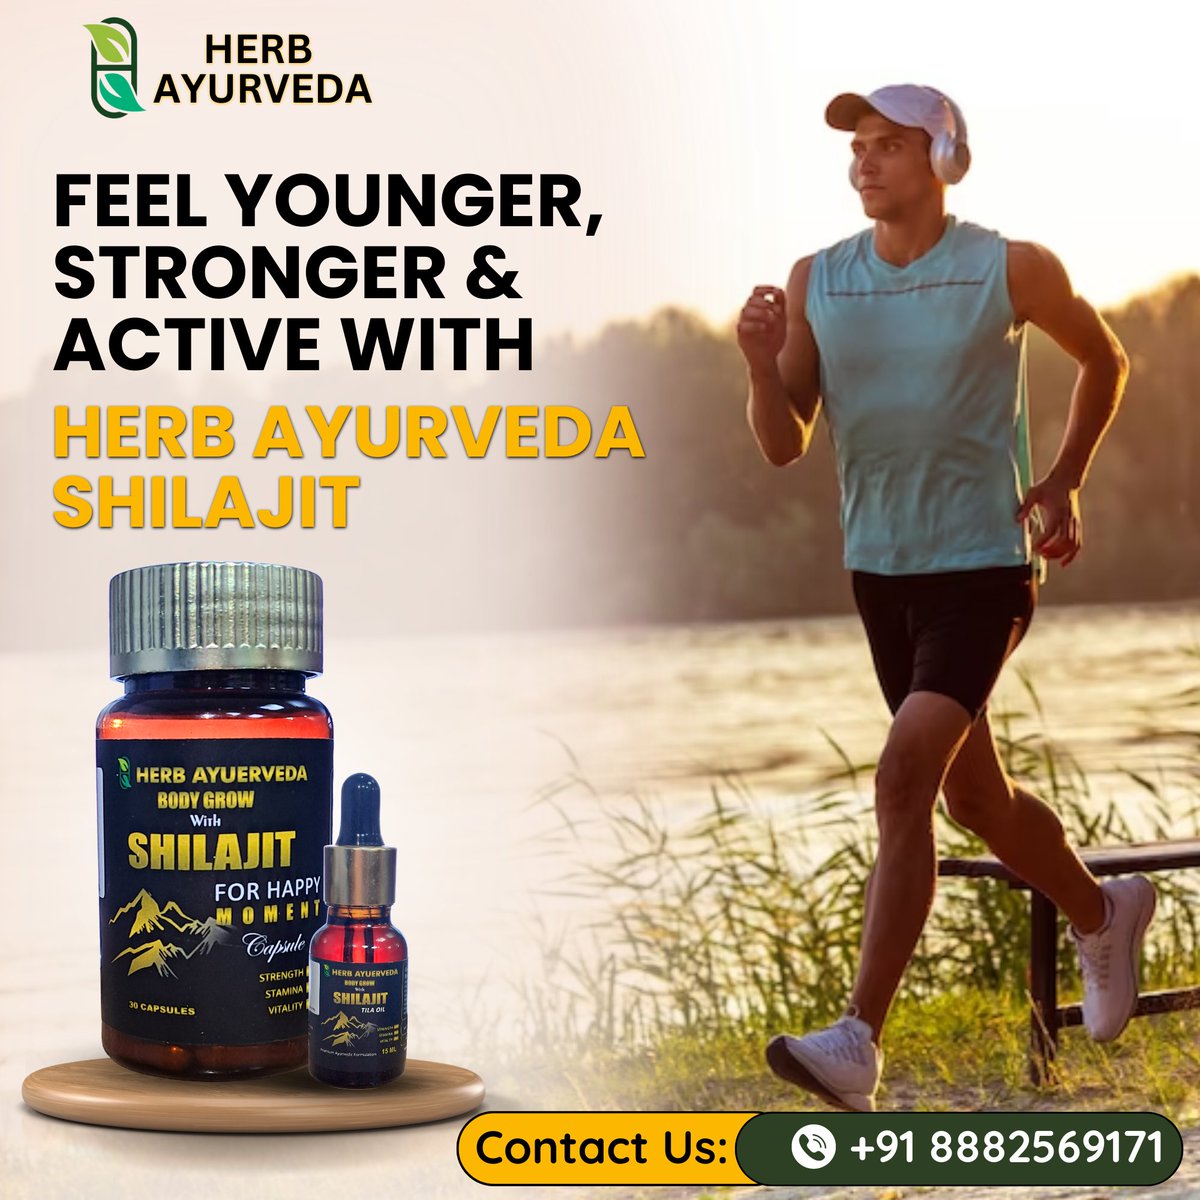 FEEL YOUNGER, STRONGER & ACTIVE WITH Herb Ayurveda
Shilajit.
.
Strength
Stamina
Energy
Vitality
.
CONTACT US -
+91 8882569171
VISIT US -
herbayuerveda.com
.
#FeelYounger
#FeelStronger
#FeelActive
#HerbAyurveda
#Shilajit
#NaturalEnergy
#StrengthandStamina
#EnergizeYourLife